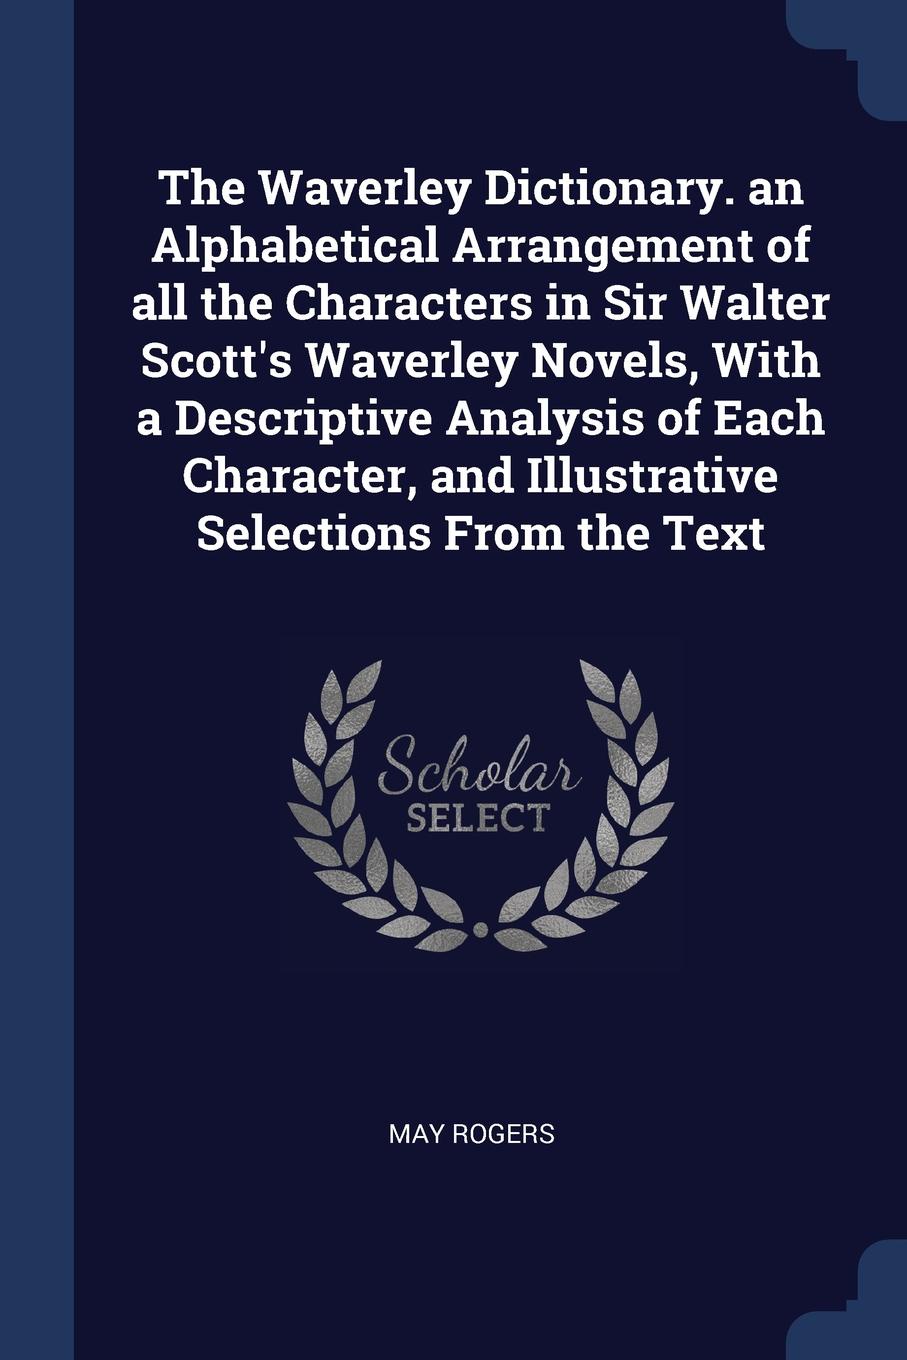 The Waverley Dictionary. an Alphabetical Arrangement of all the Characters in Sir Walter Scott.s Waverley Novels, With a Descriptive Analysis of Each Character, and Illustrative Selections From the Text